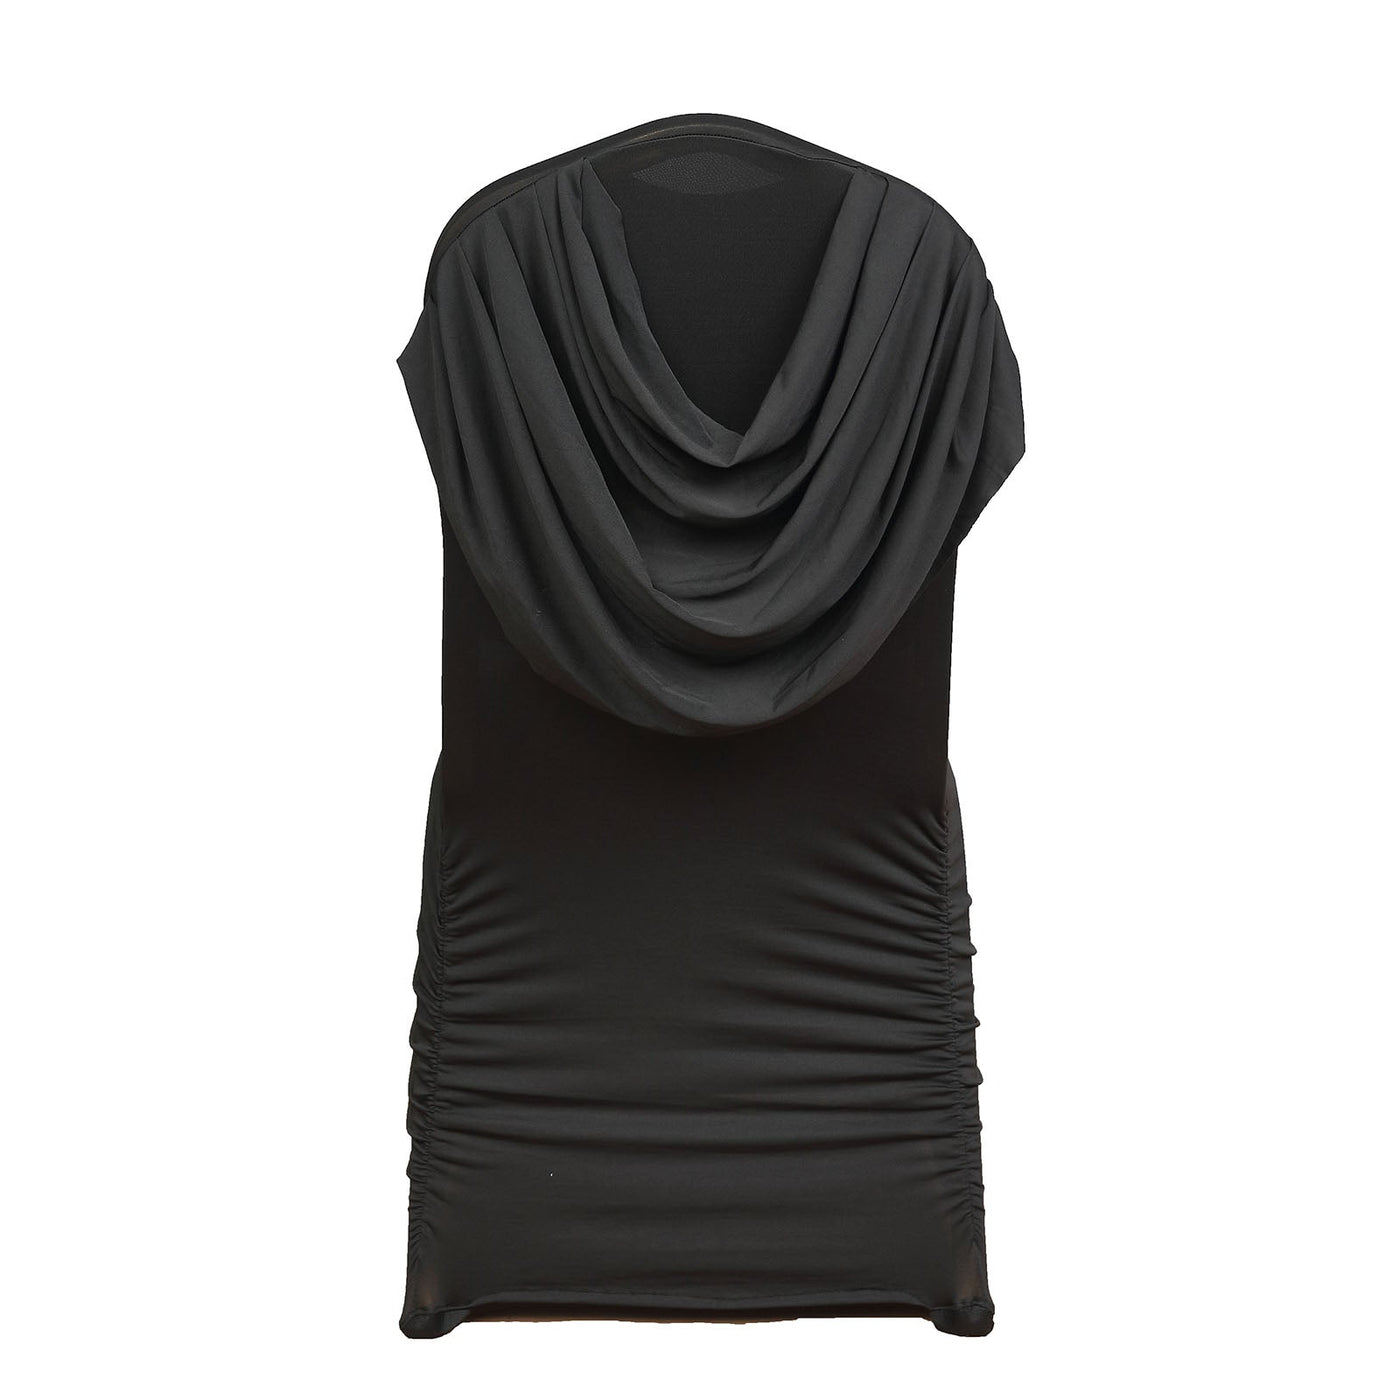 Black Ruched Swag Banquet Chair Cover | eFavormart.com